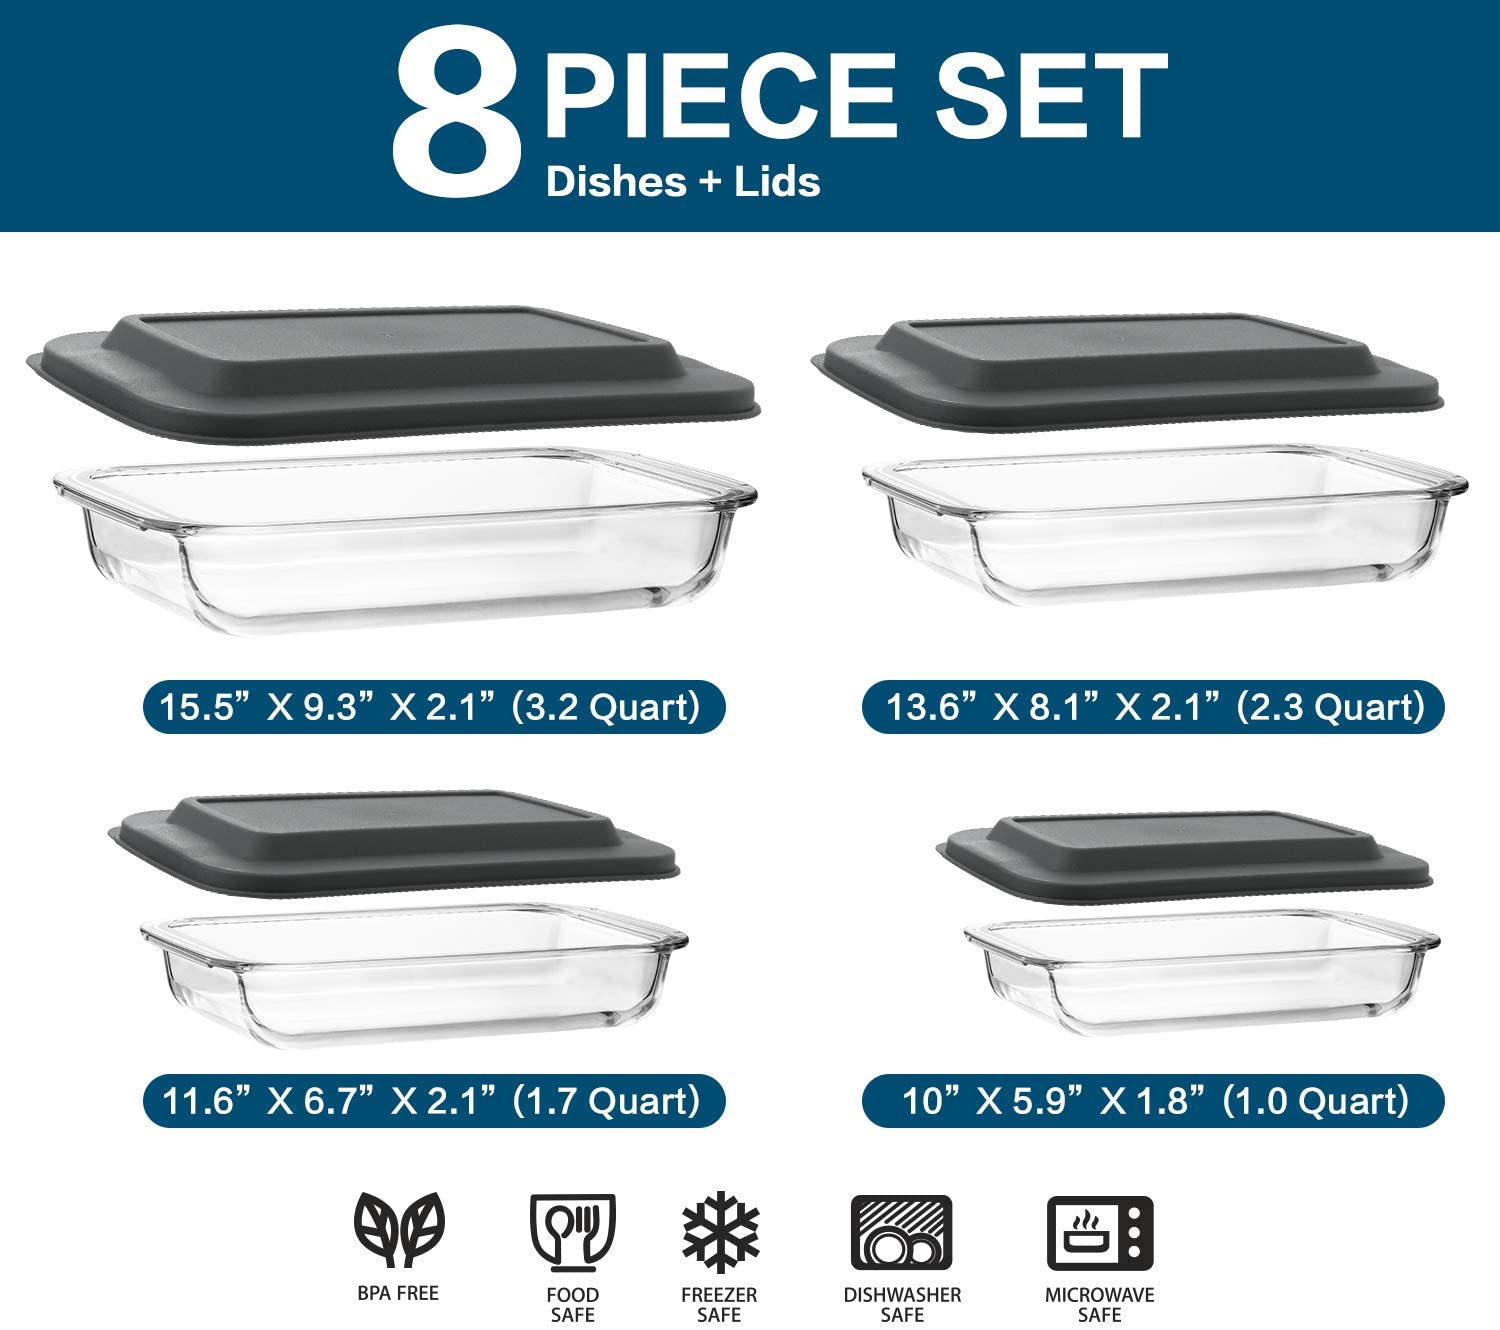 PYREX Clear 4-Piece Glass Bakeware Set in the Bakeware department